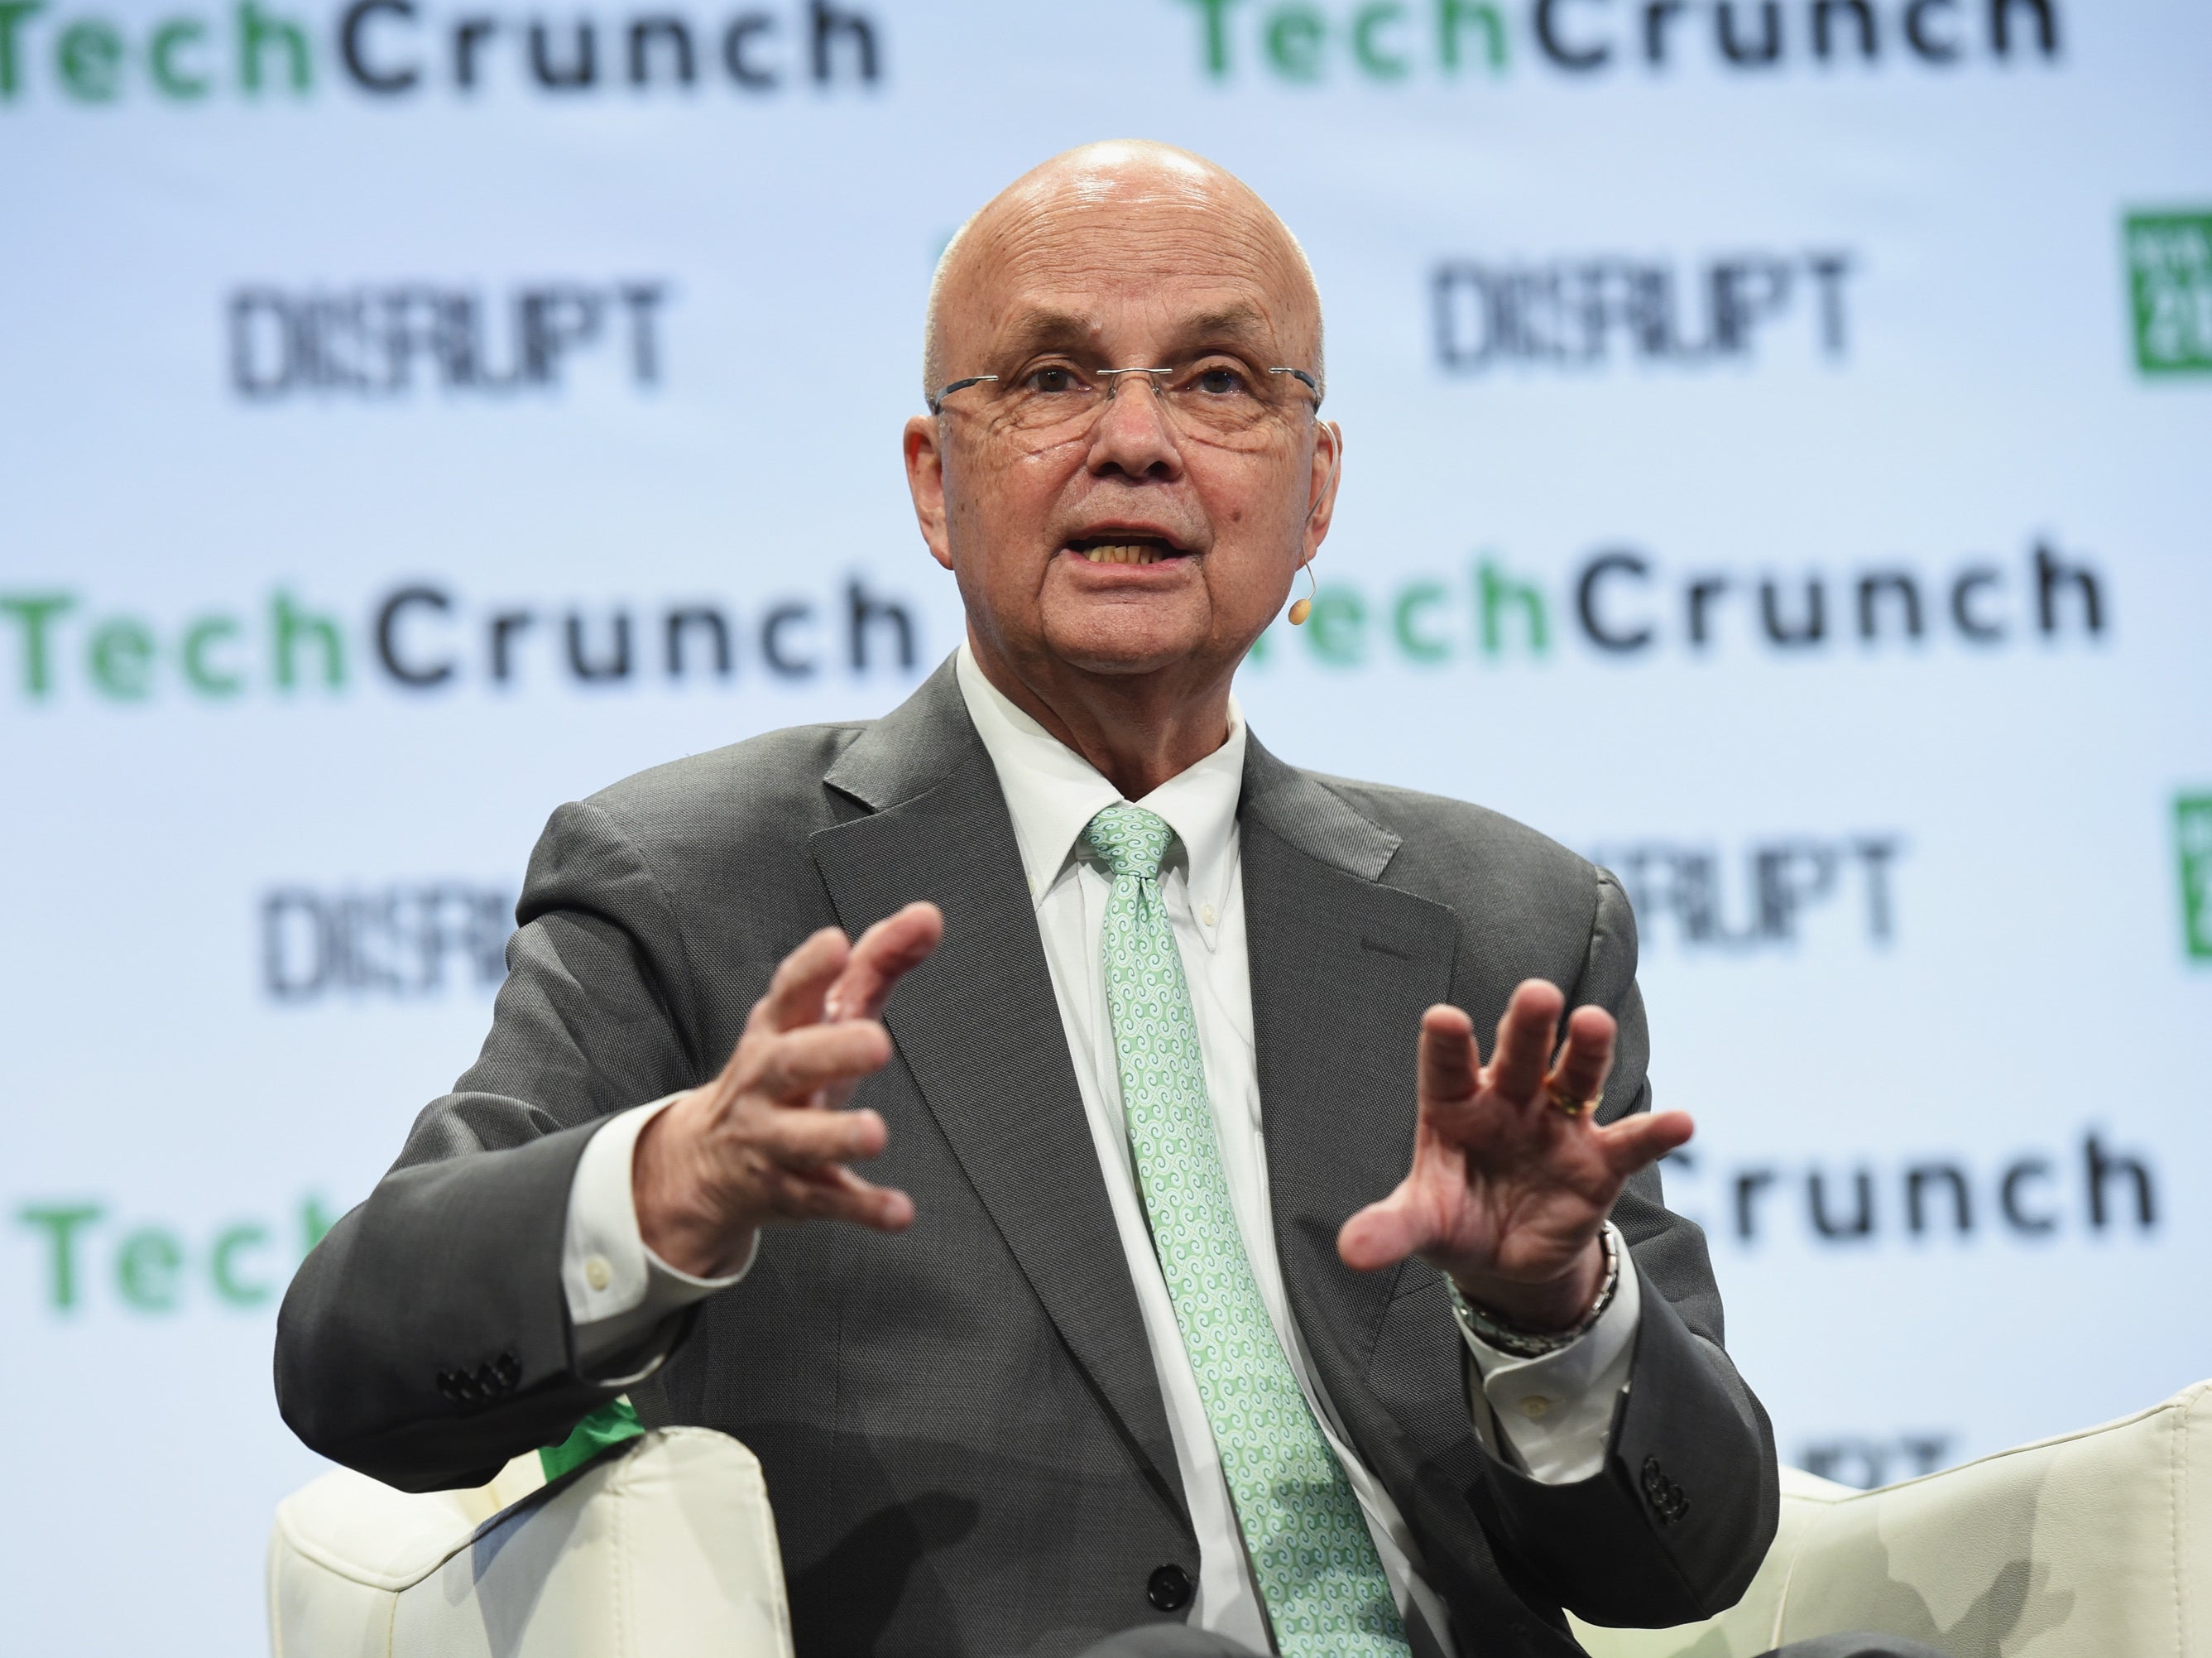 General Michael Hayden speaks onstage during TechCrunch Disrupt NY 2016 at Brooklyn Cruise Terminal on May 11, 2016